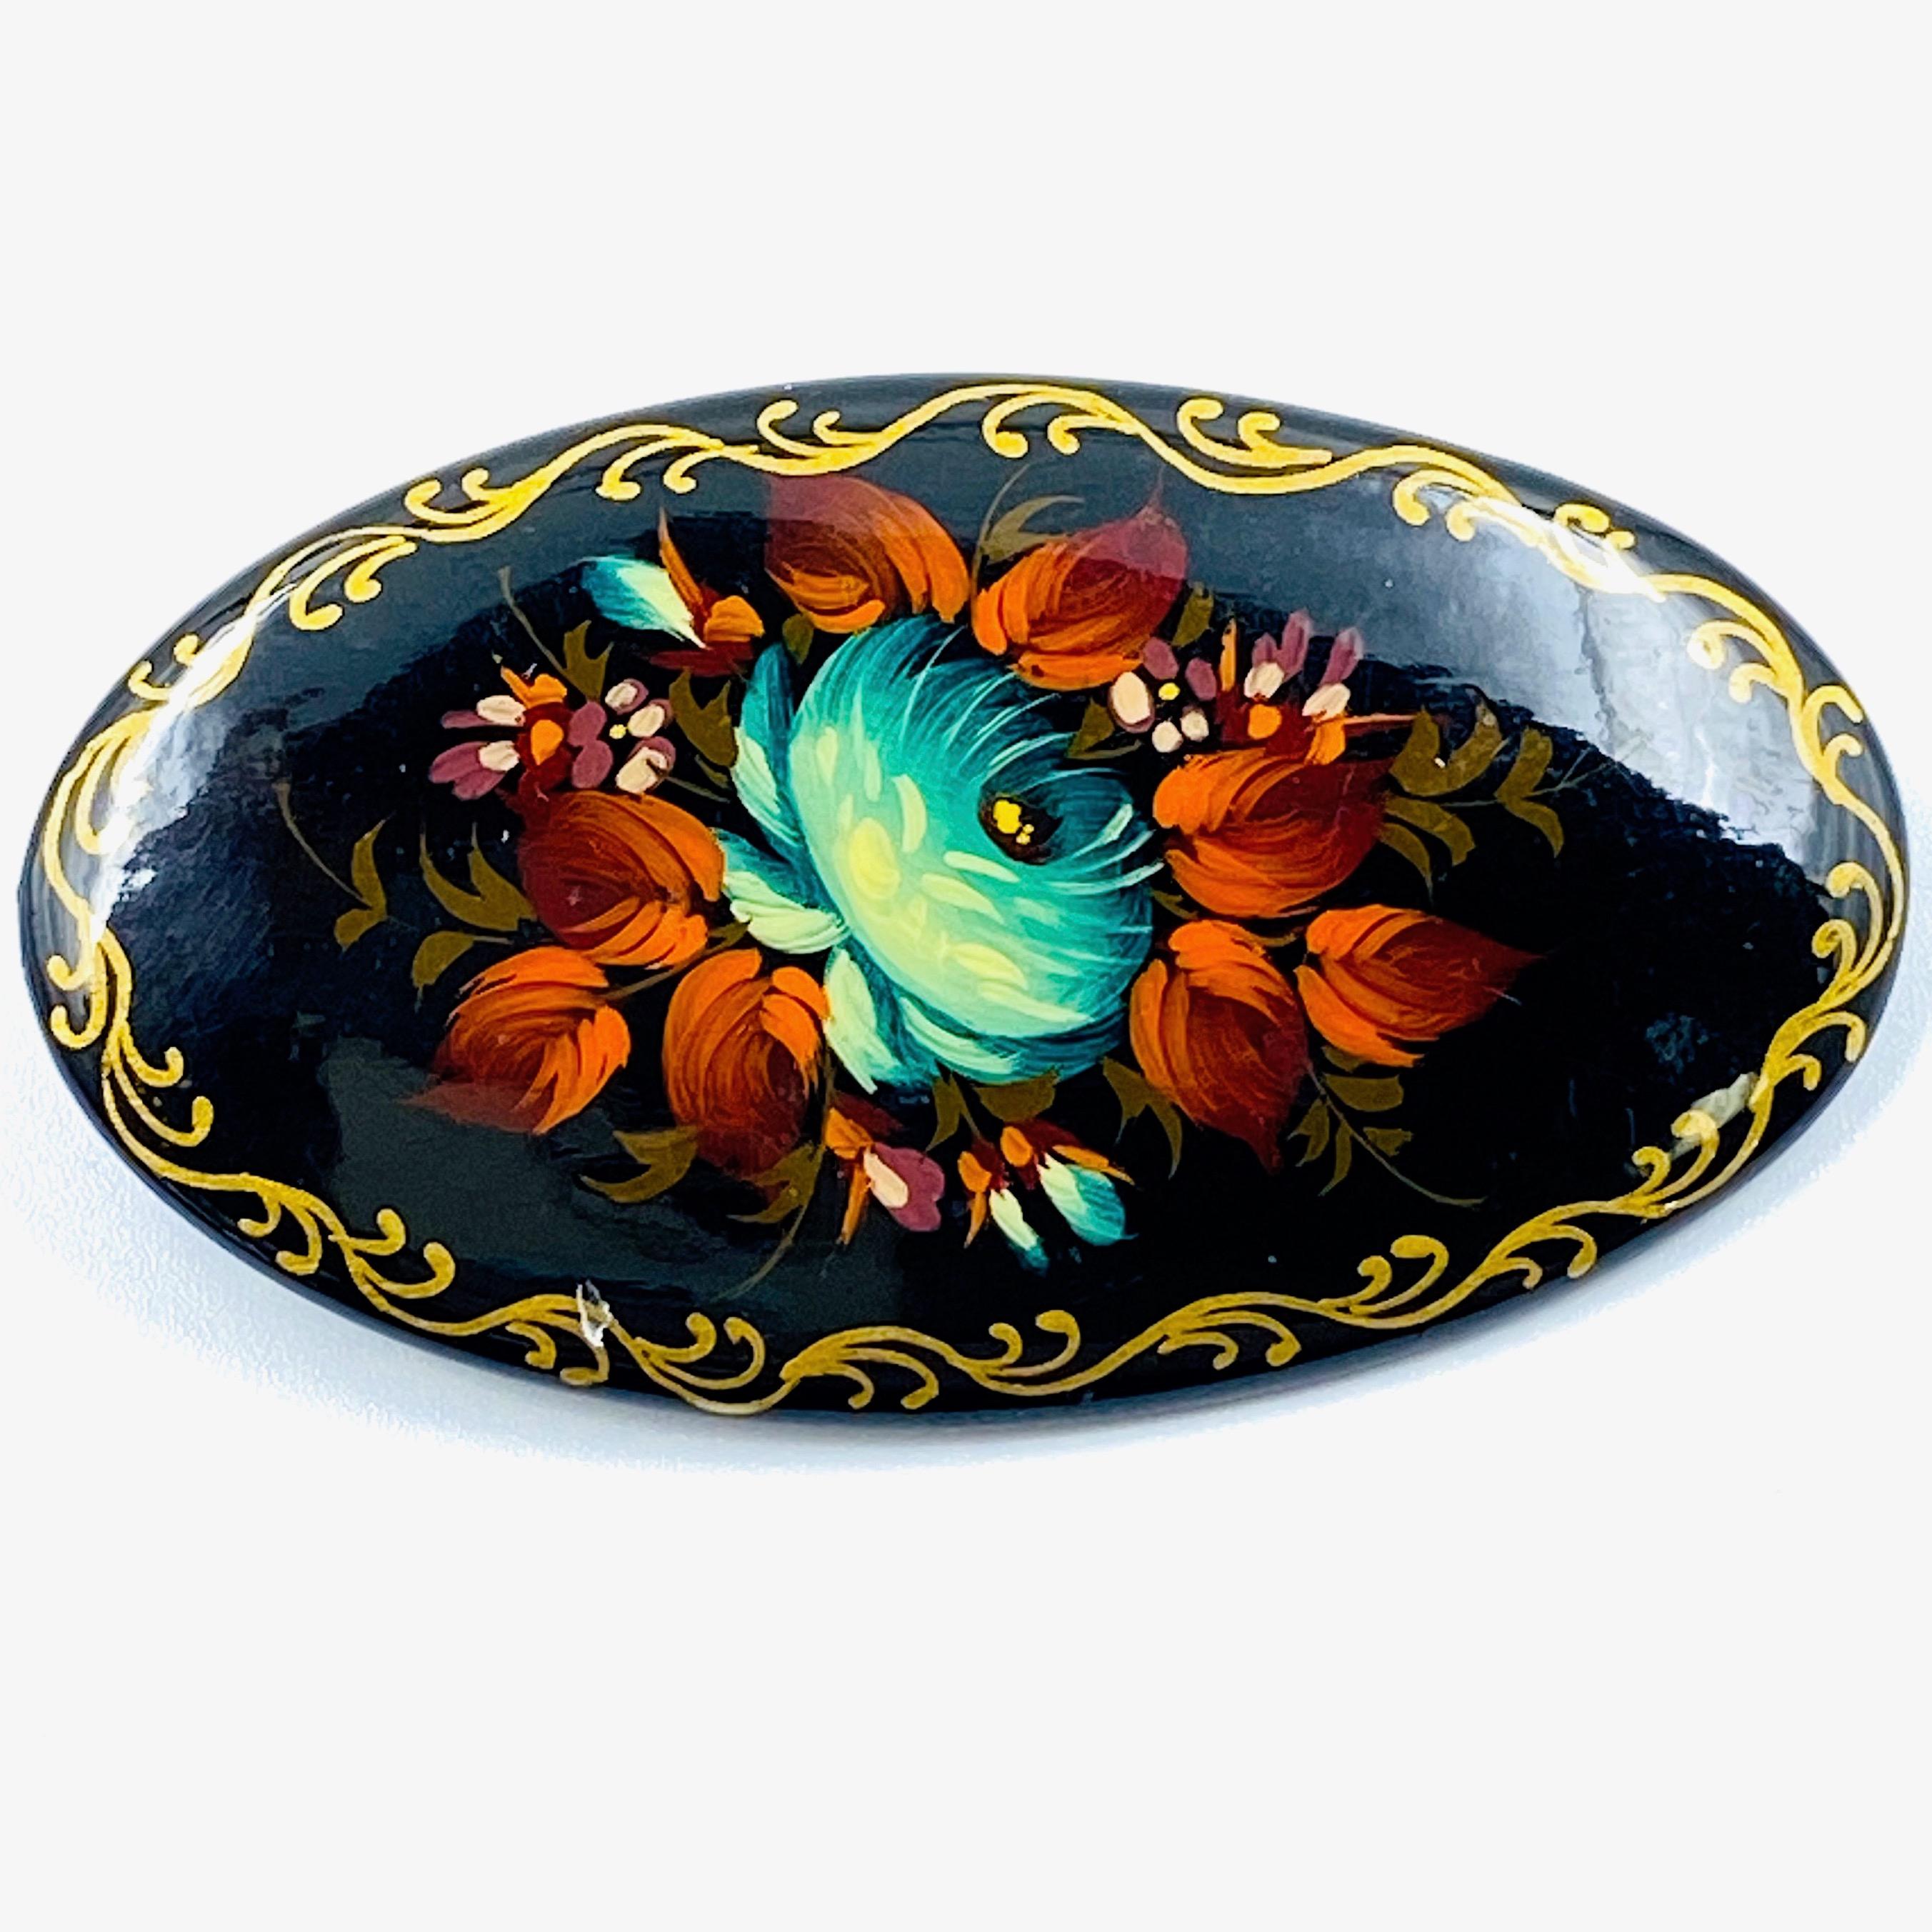 Vintage Russian lacquer hand-painted flower pin